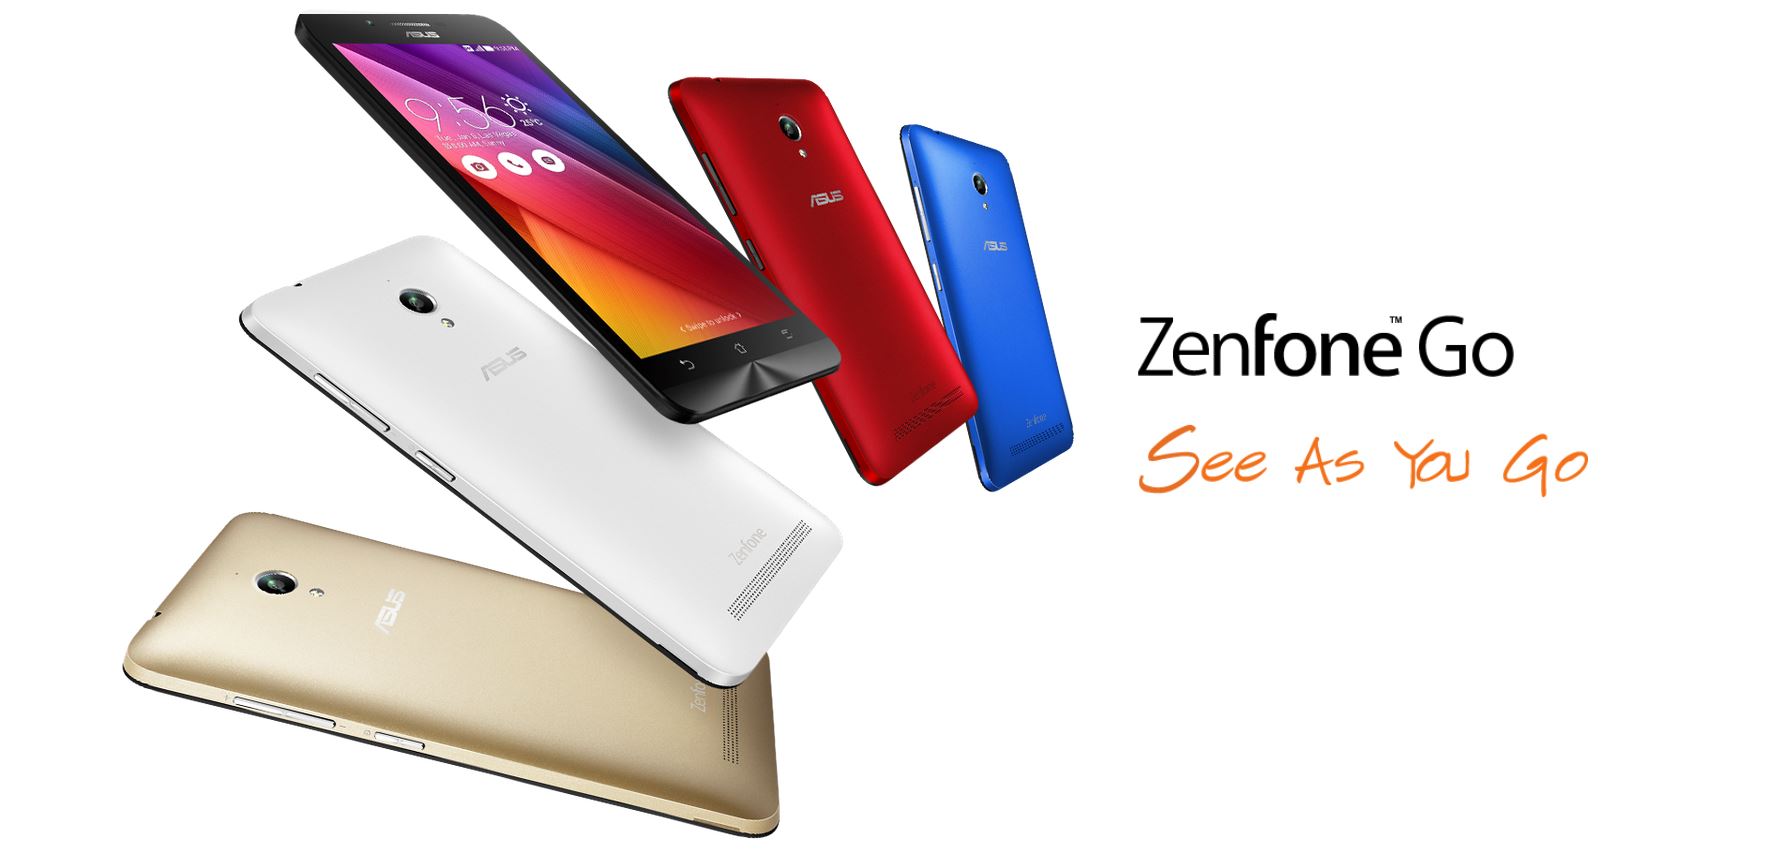 ASUS Zenfone GO is now available in ASUS MY store 34